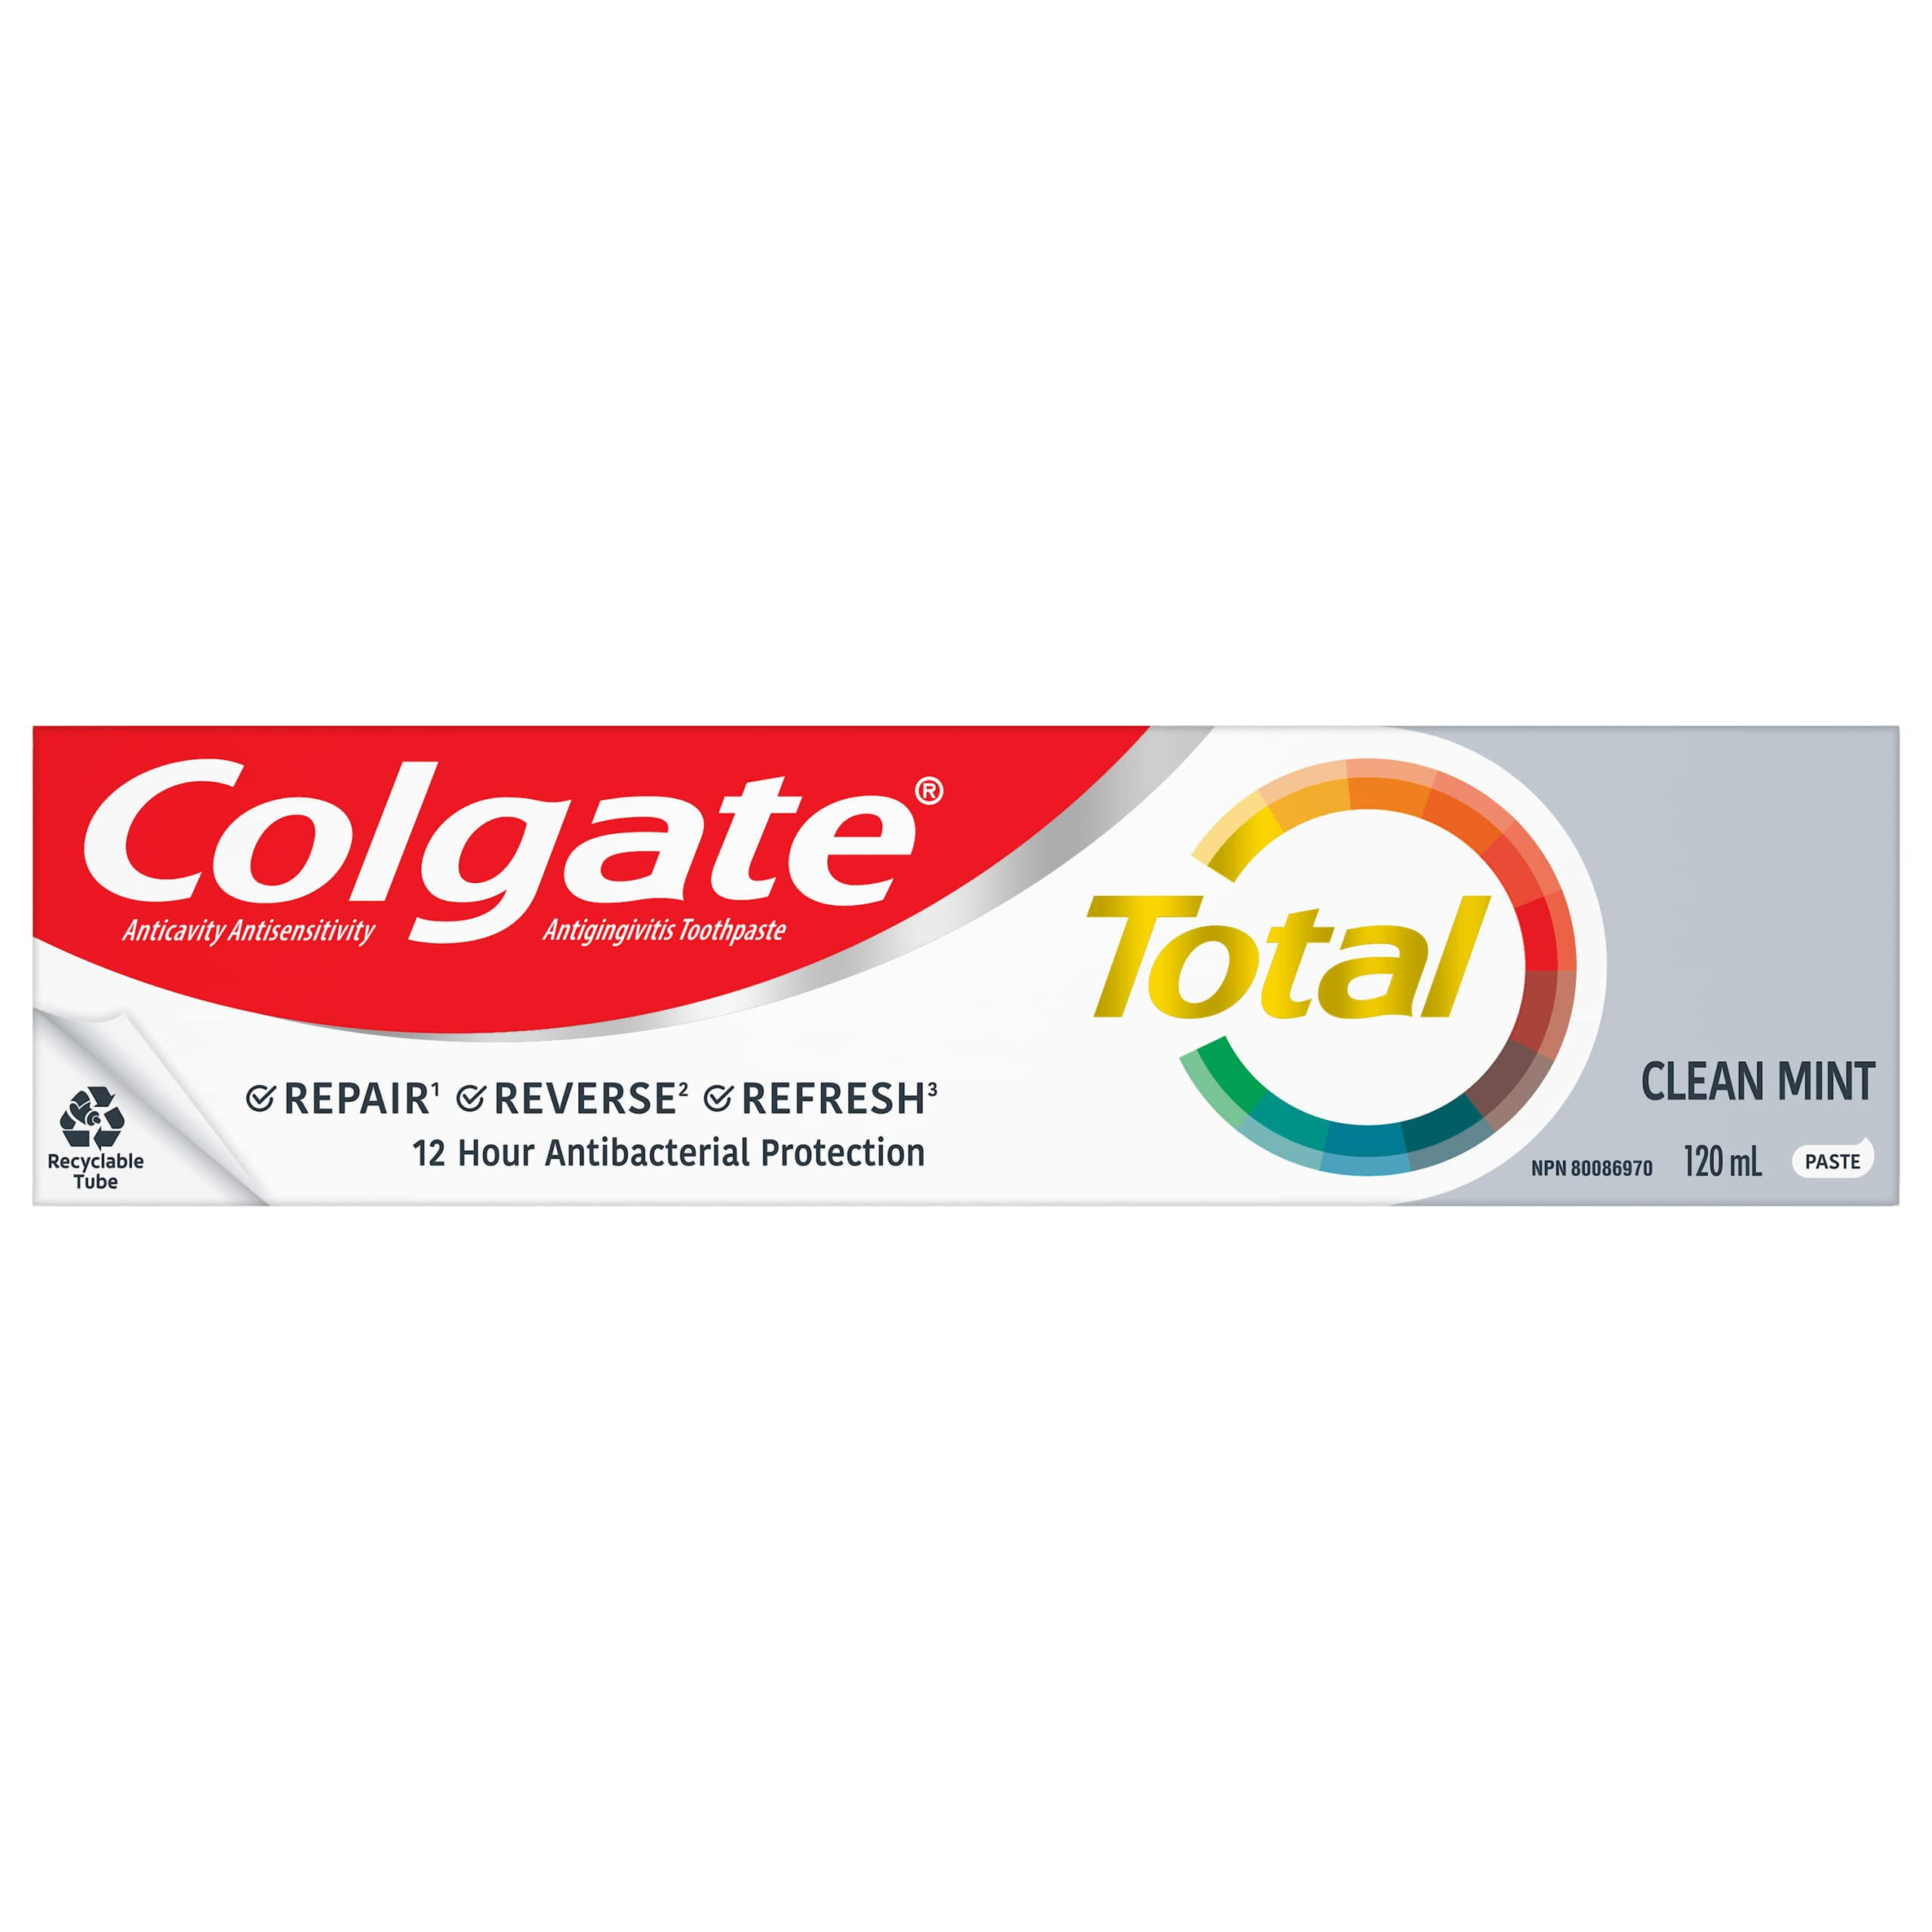 Colgate Total Clean Mint Toothpaste - 120 ml